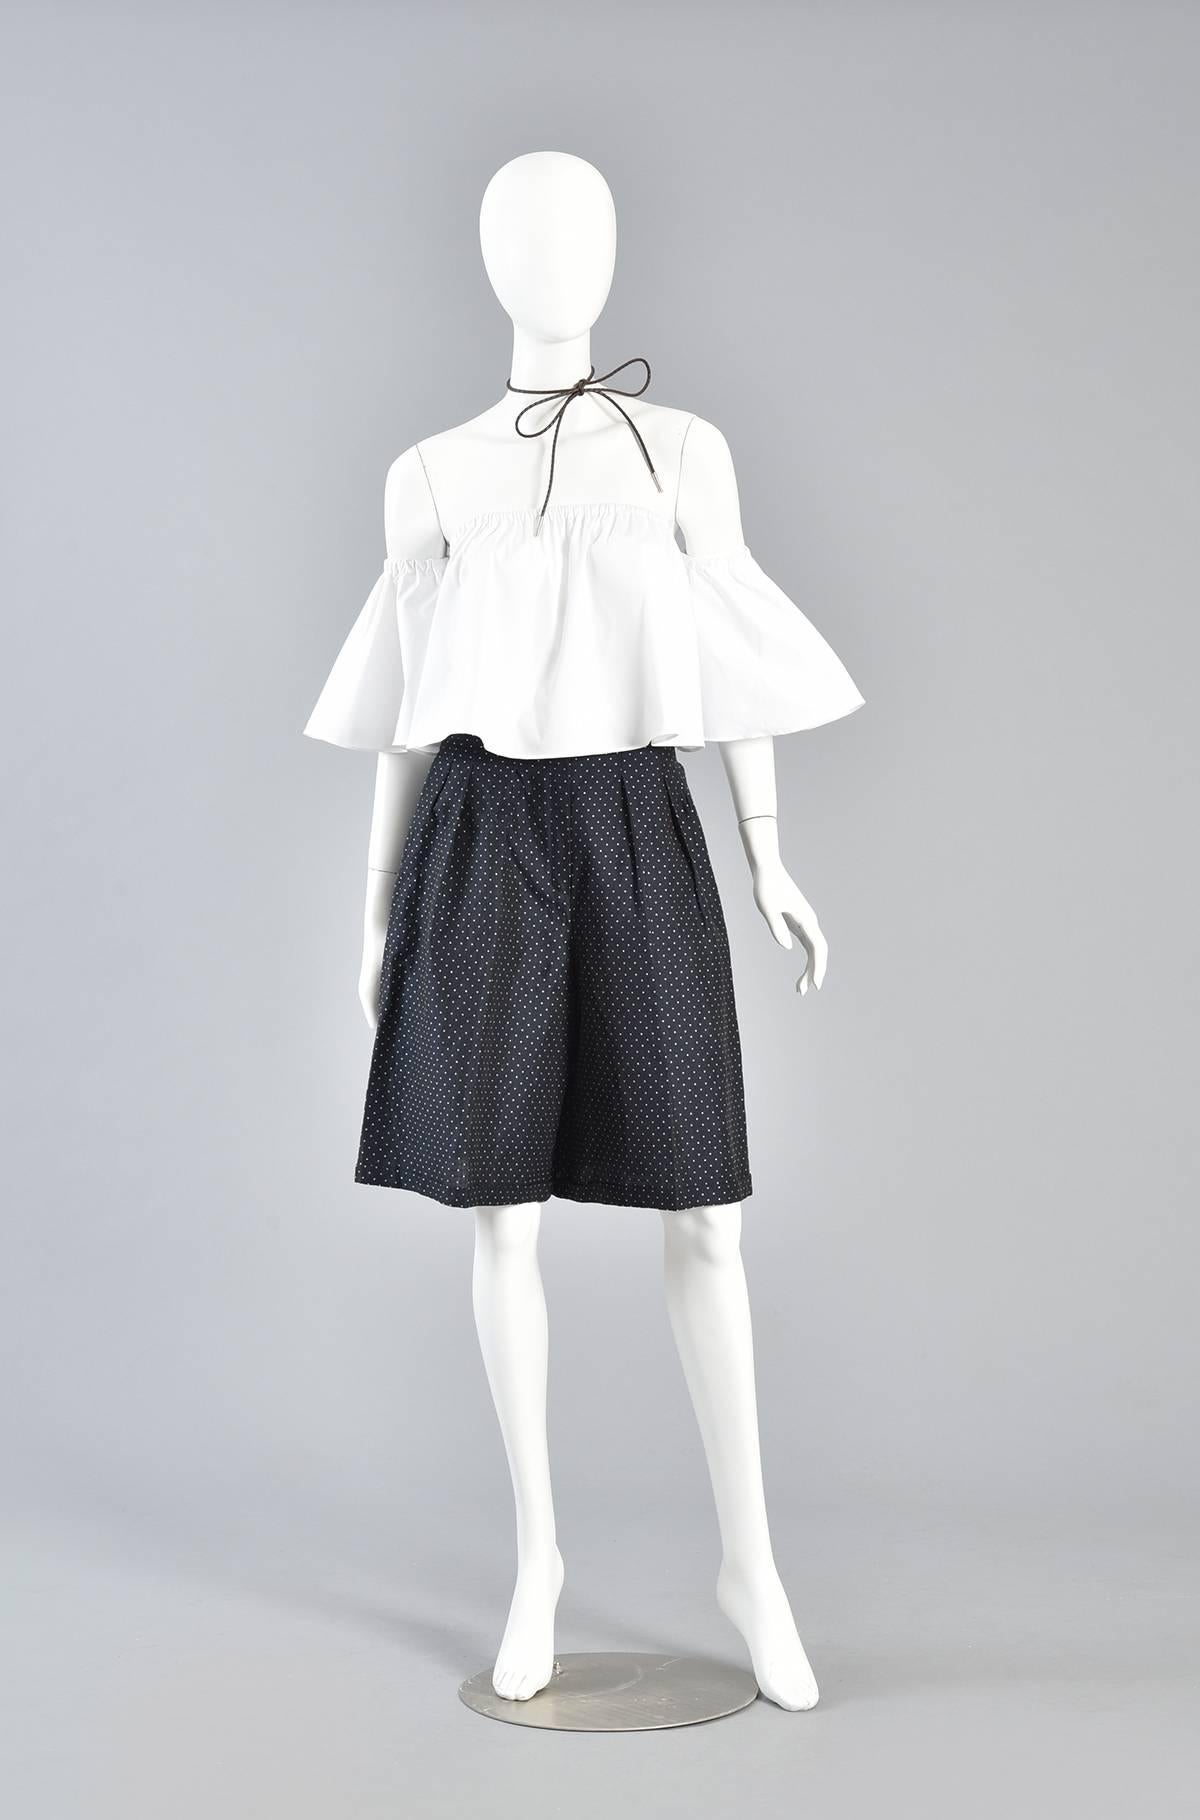 Navy Blue & White Flared Polkadot Shorts

Bustown Modern is so happy to offer these super cute 1980s polkadot culottes. High waisted navy blue culottes with with pleated top, flared shorts, cuffed hem and side pockets.

Excellent vintage